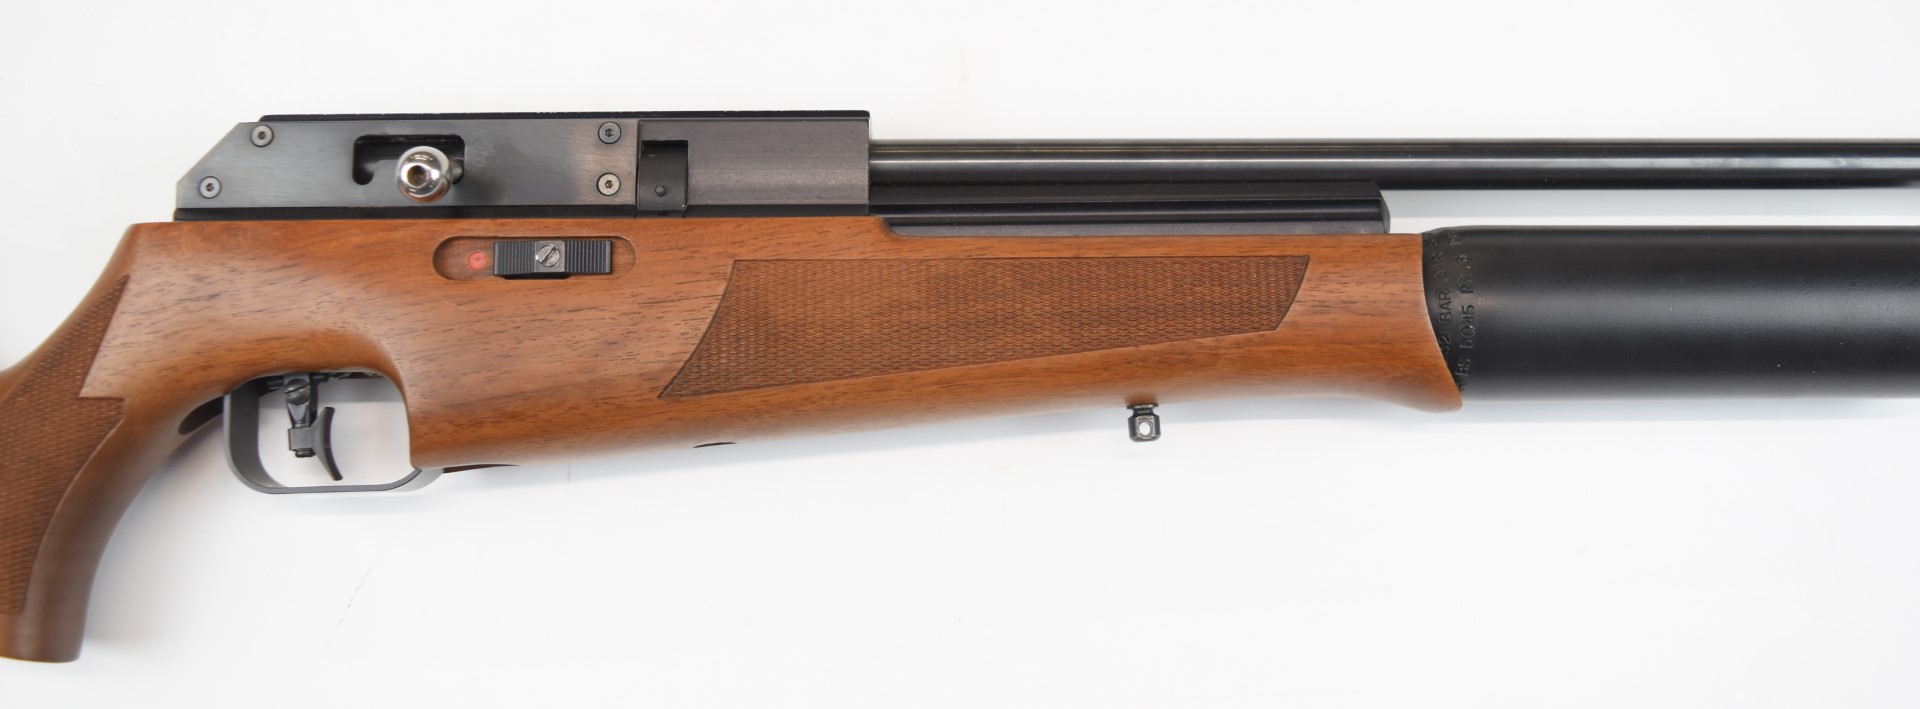 BSA .177 PCP air rifle with chequered semi-pistol grip and forend, sling mounts, adjustable - Image 4 of 19